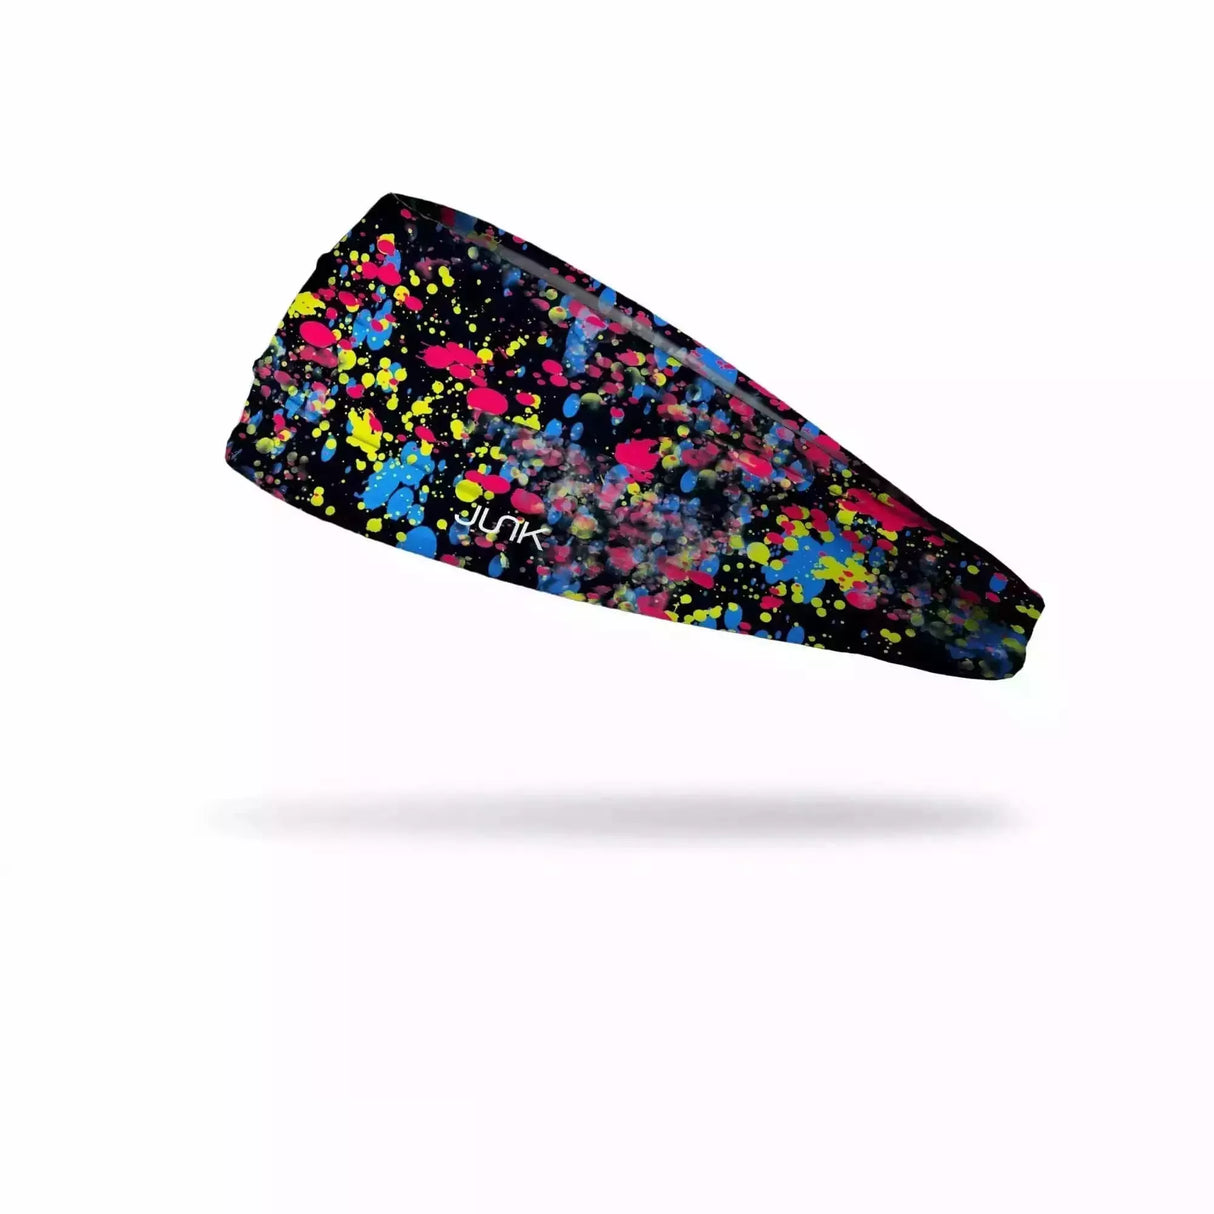 JUNK Popping Paint Headband  -  One Size Fits Most / Black